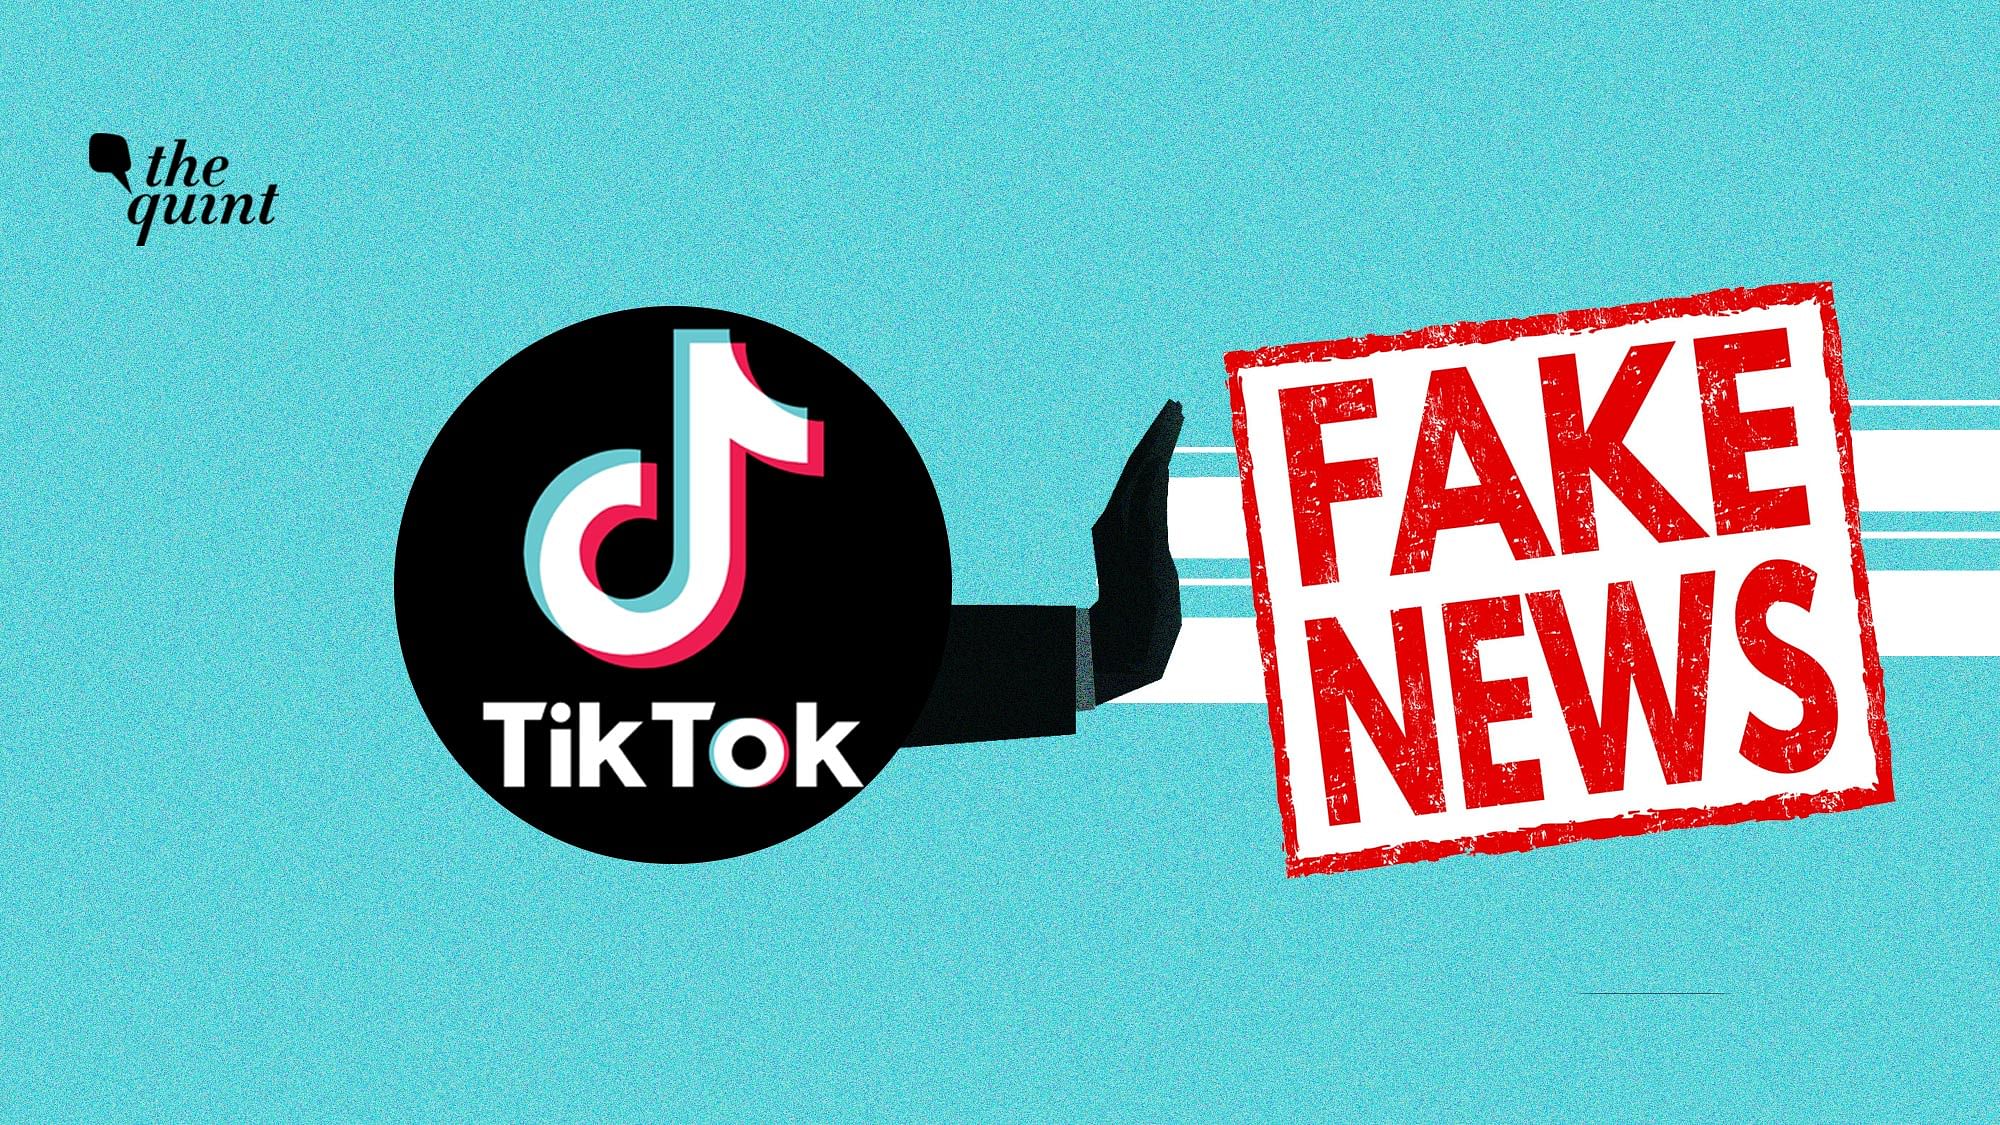 Trump has not only blocked TikTok for privacy, but also for being a source of 'fake news'